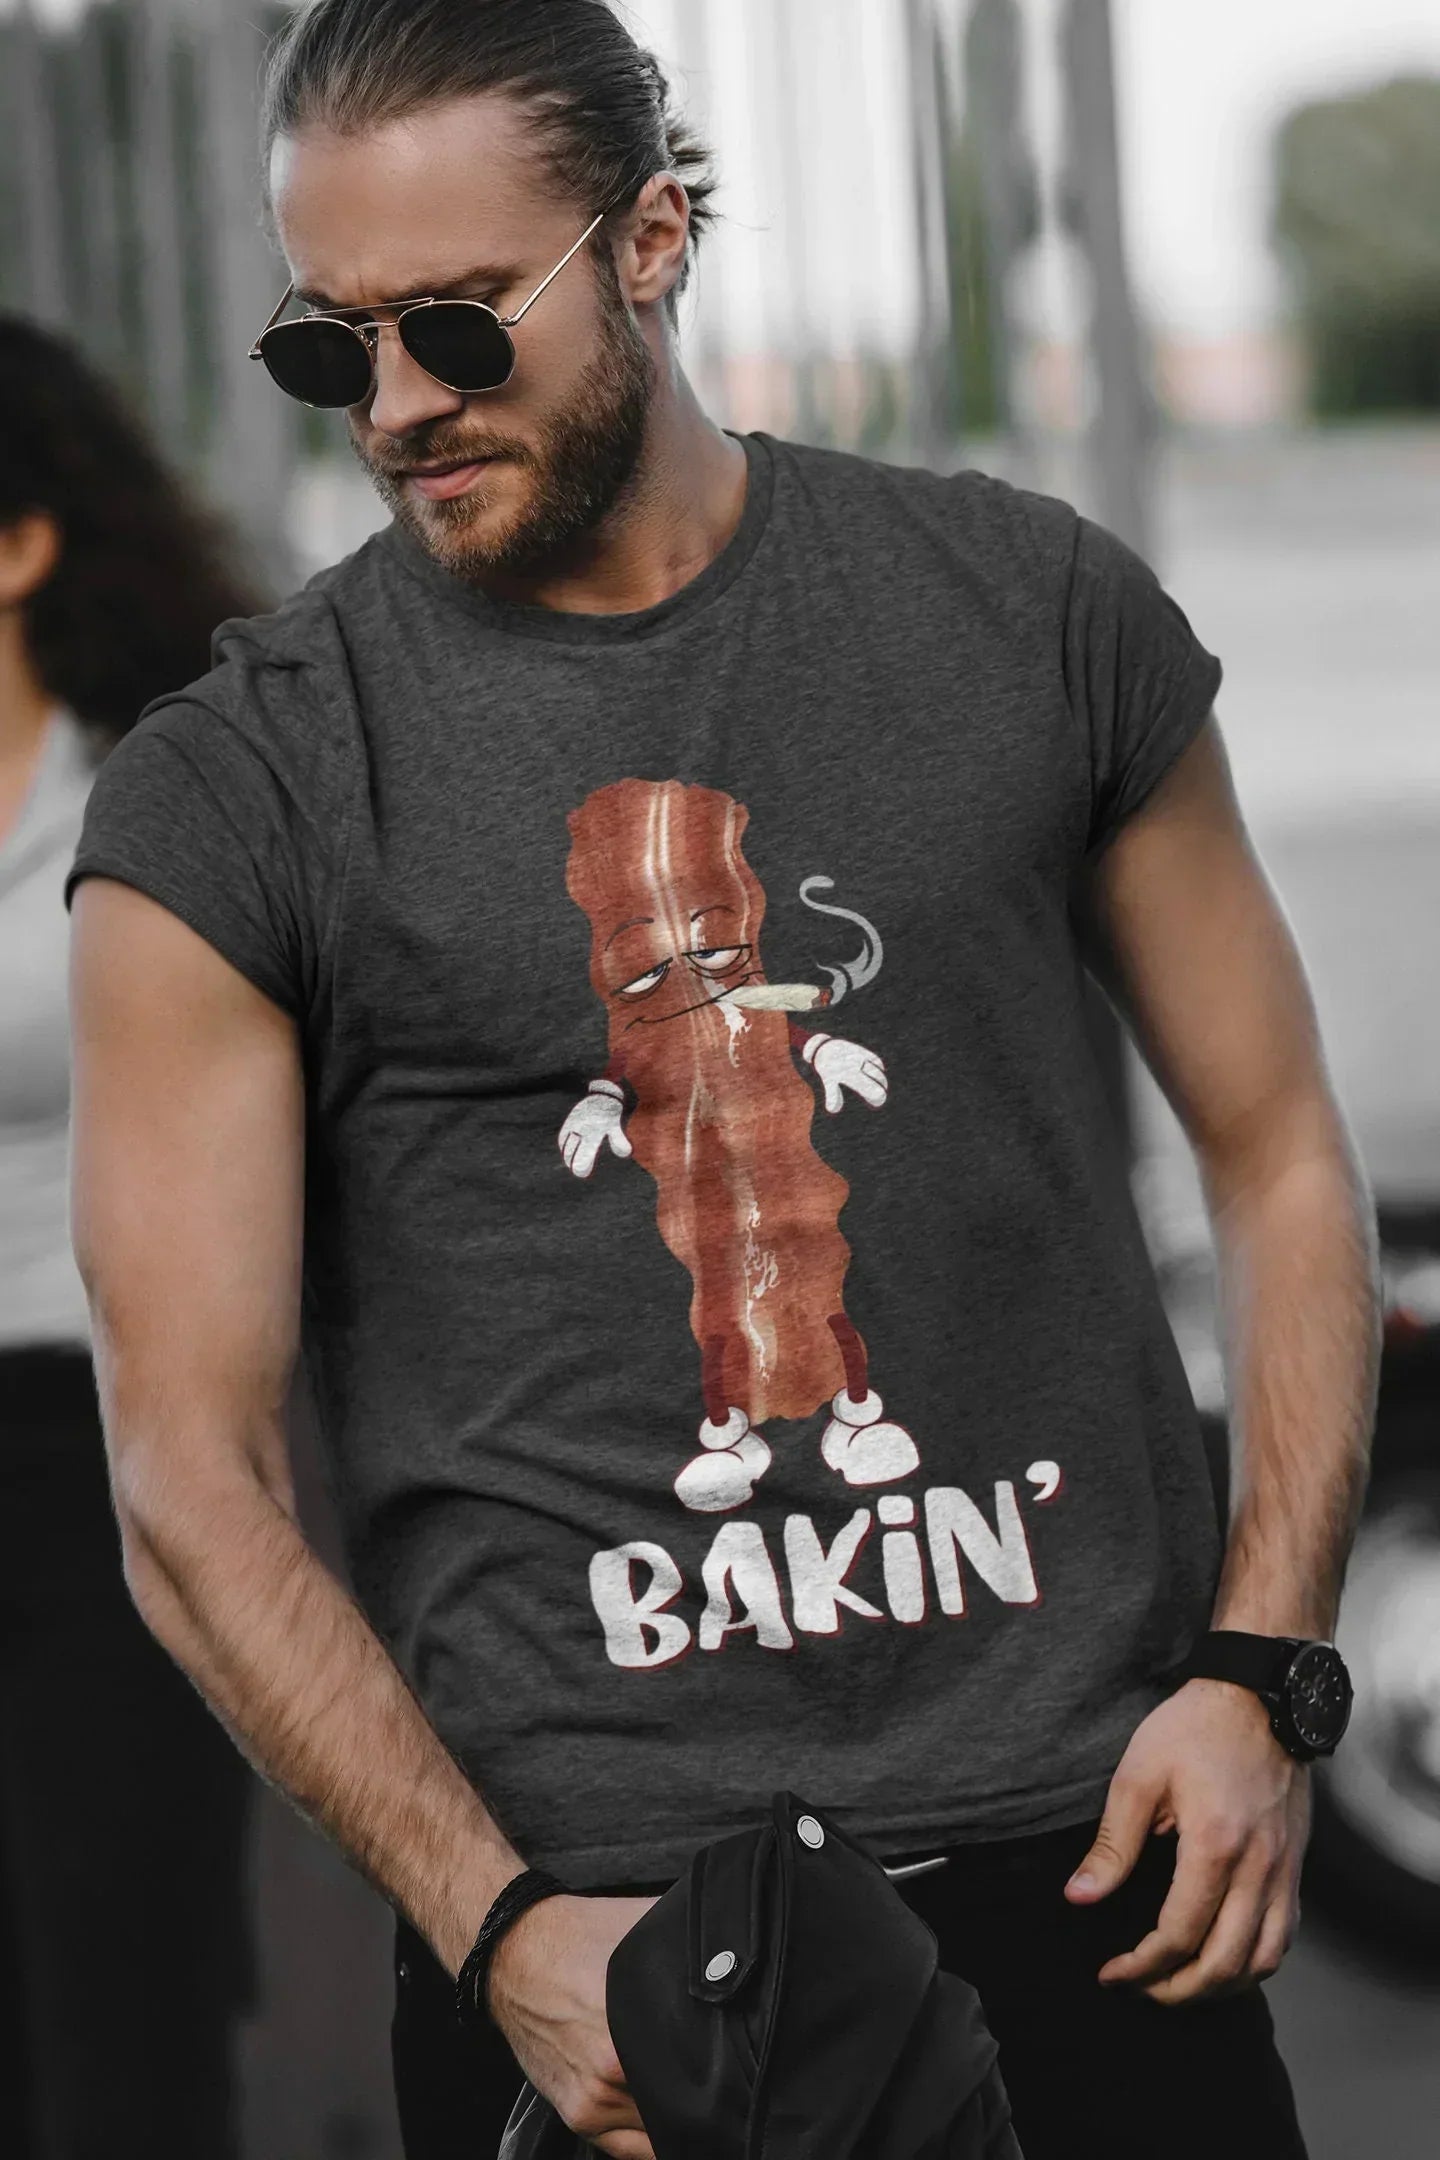 Stoner Gifts, Hippie Clothes, Weed Gifts, Weed Shirt, Stoner Gift, Stoner Girl, Stoner Gift for Him, Bakin Gift for Her, Marijuana T shirts